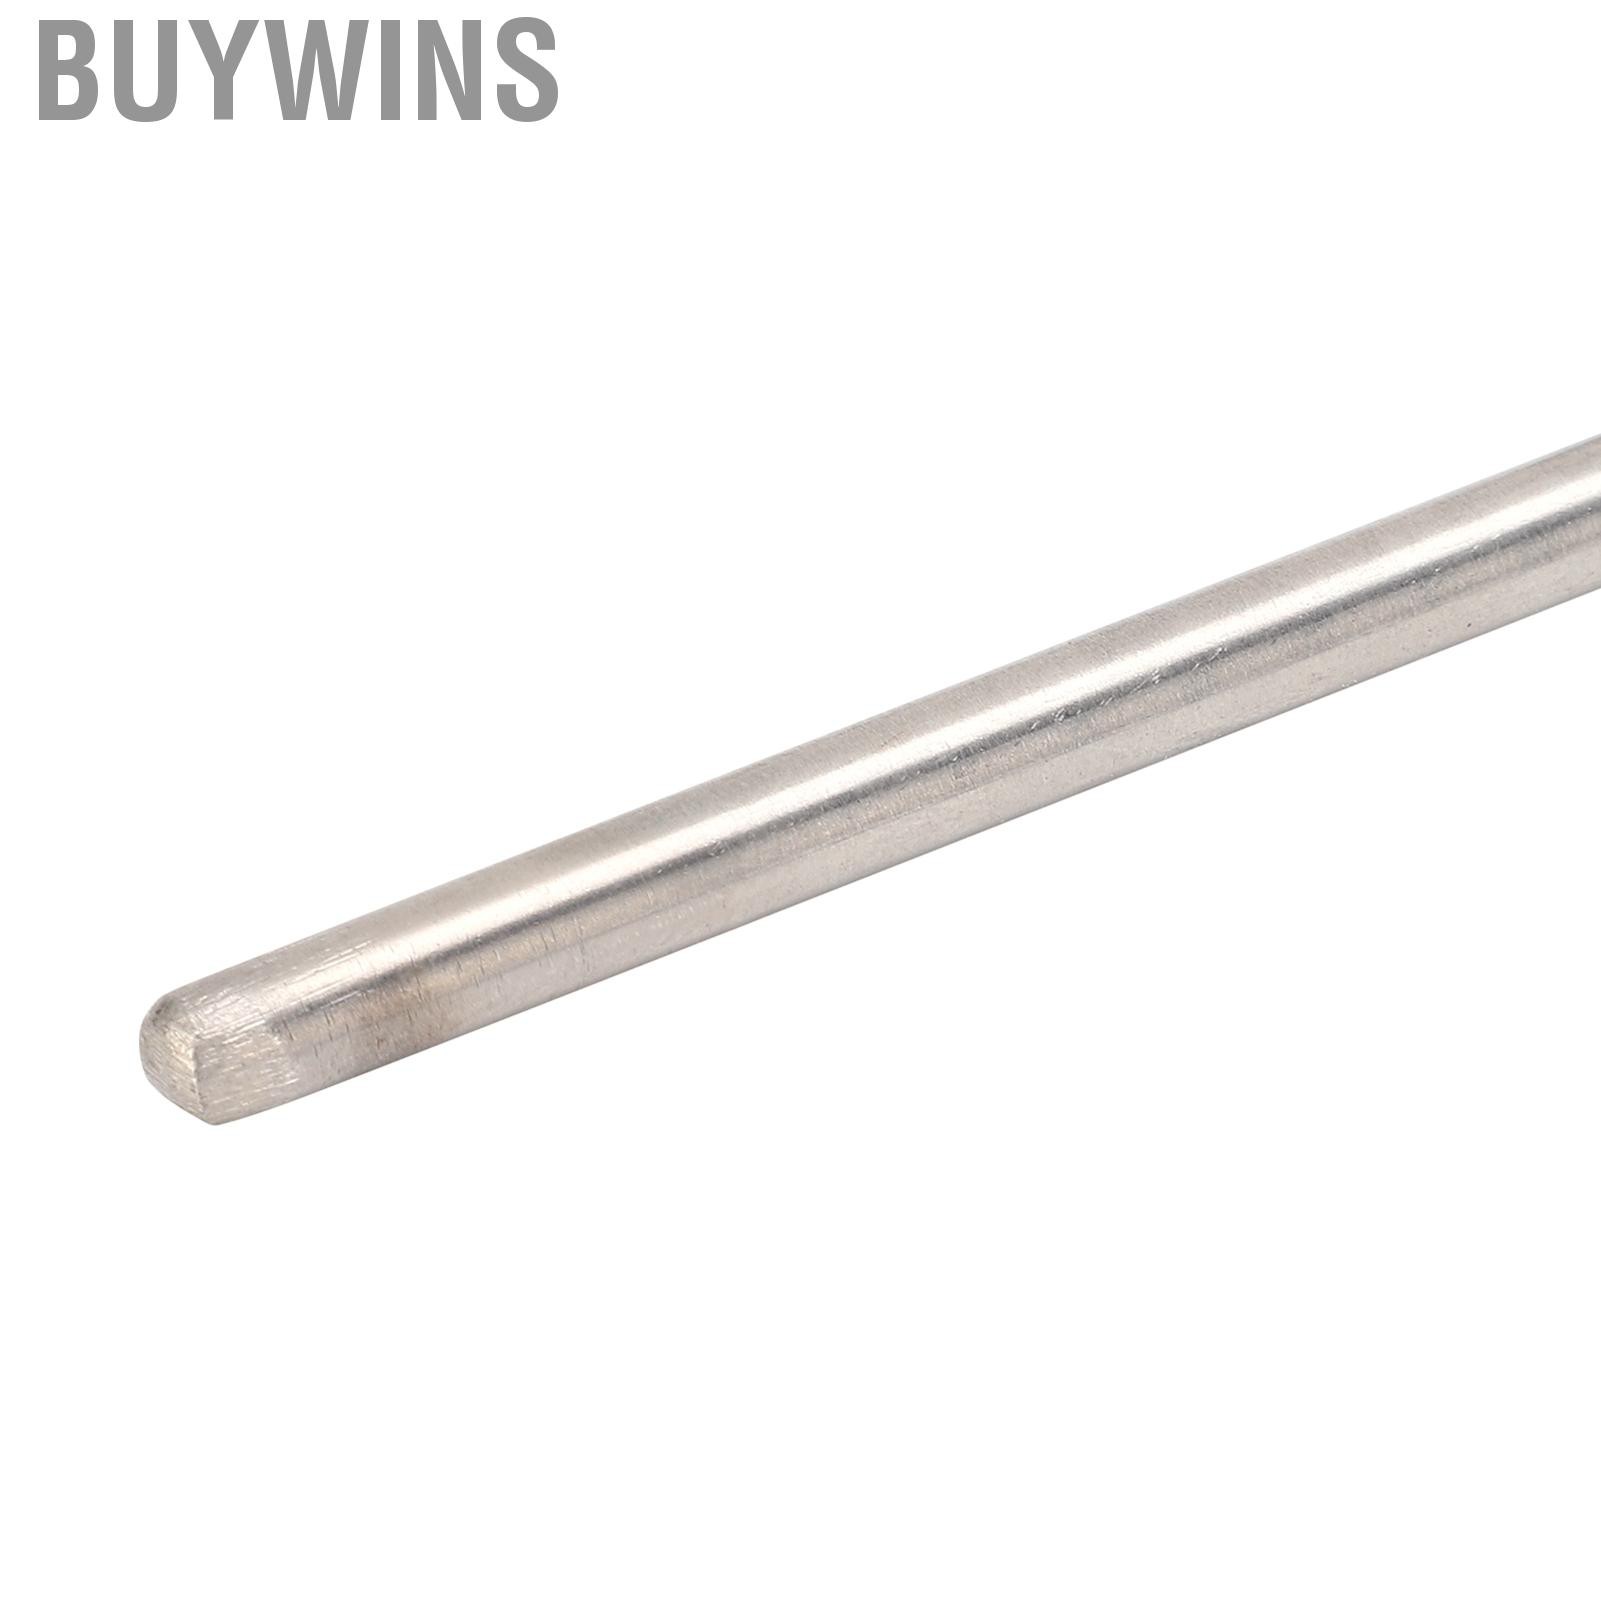 Buywins 5.9in K-Type Probe Thermocouple Precise 0-800°C Temperature Test Stainless Steel M8 Thread